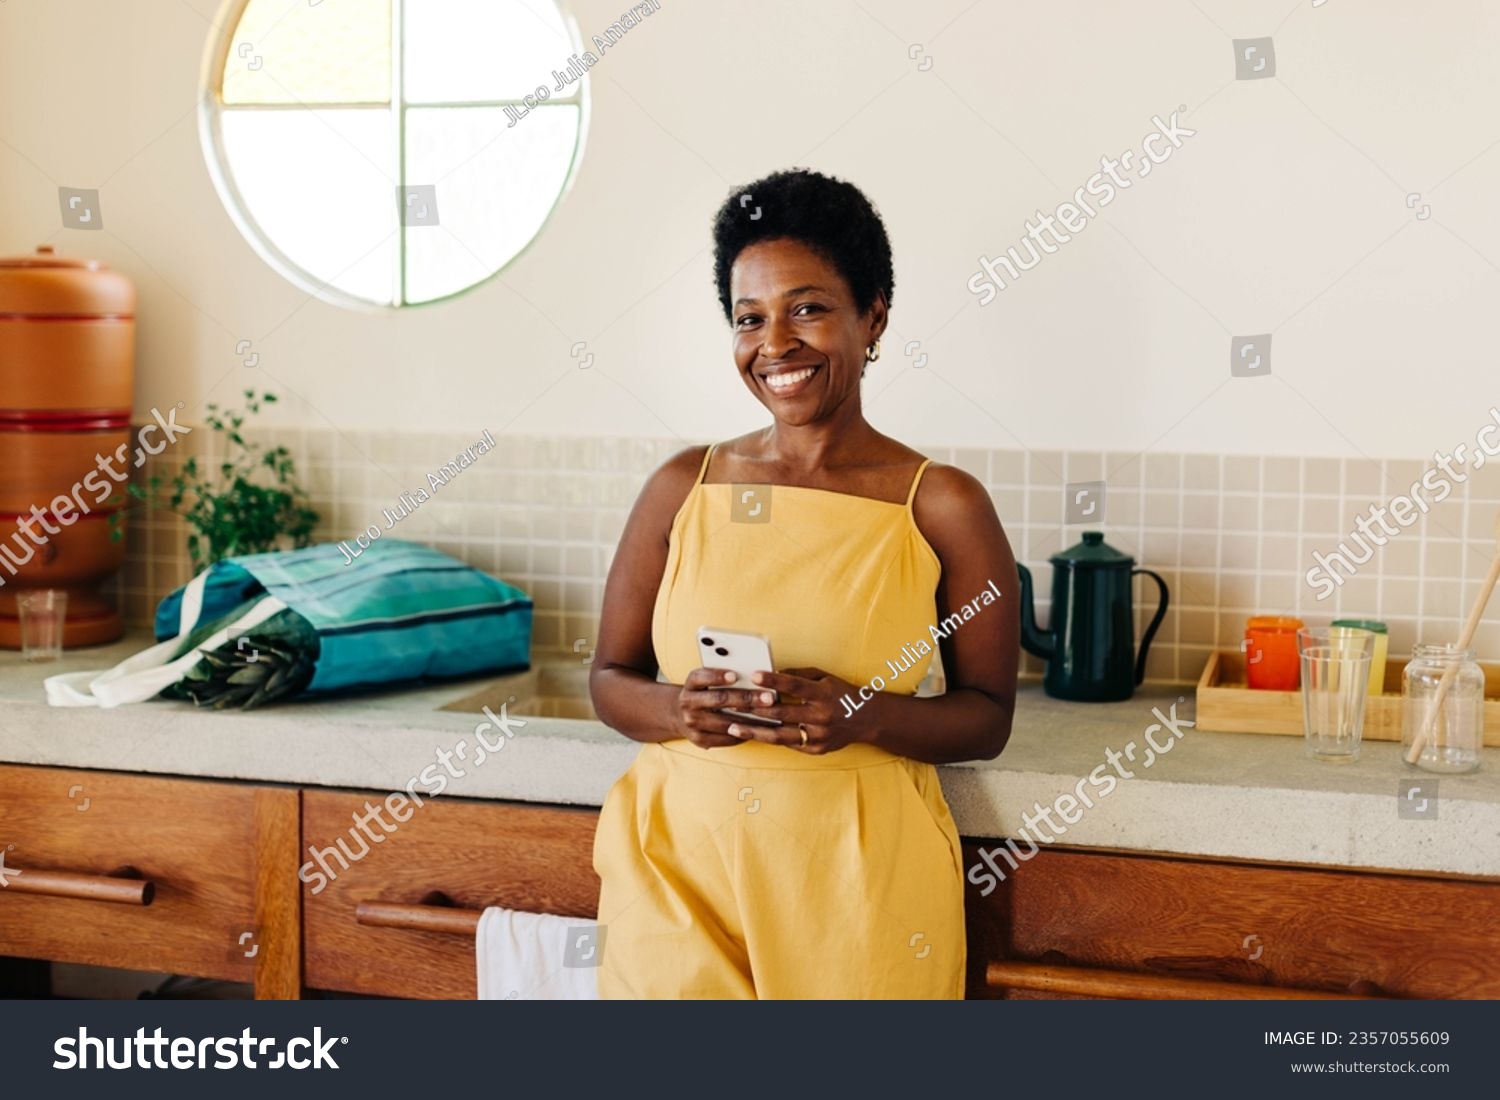 A happy Brazilian woman in a kitchen, using her mobile phone with a cheerful smile. #2357055609